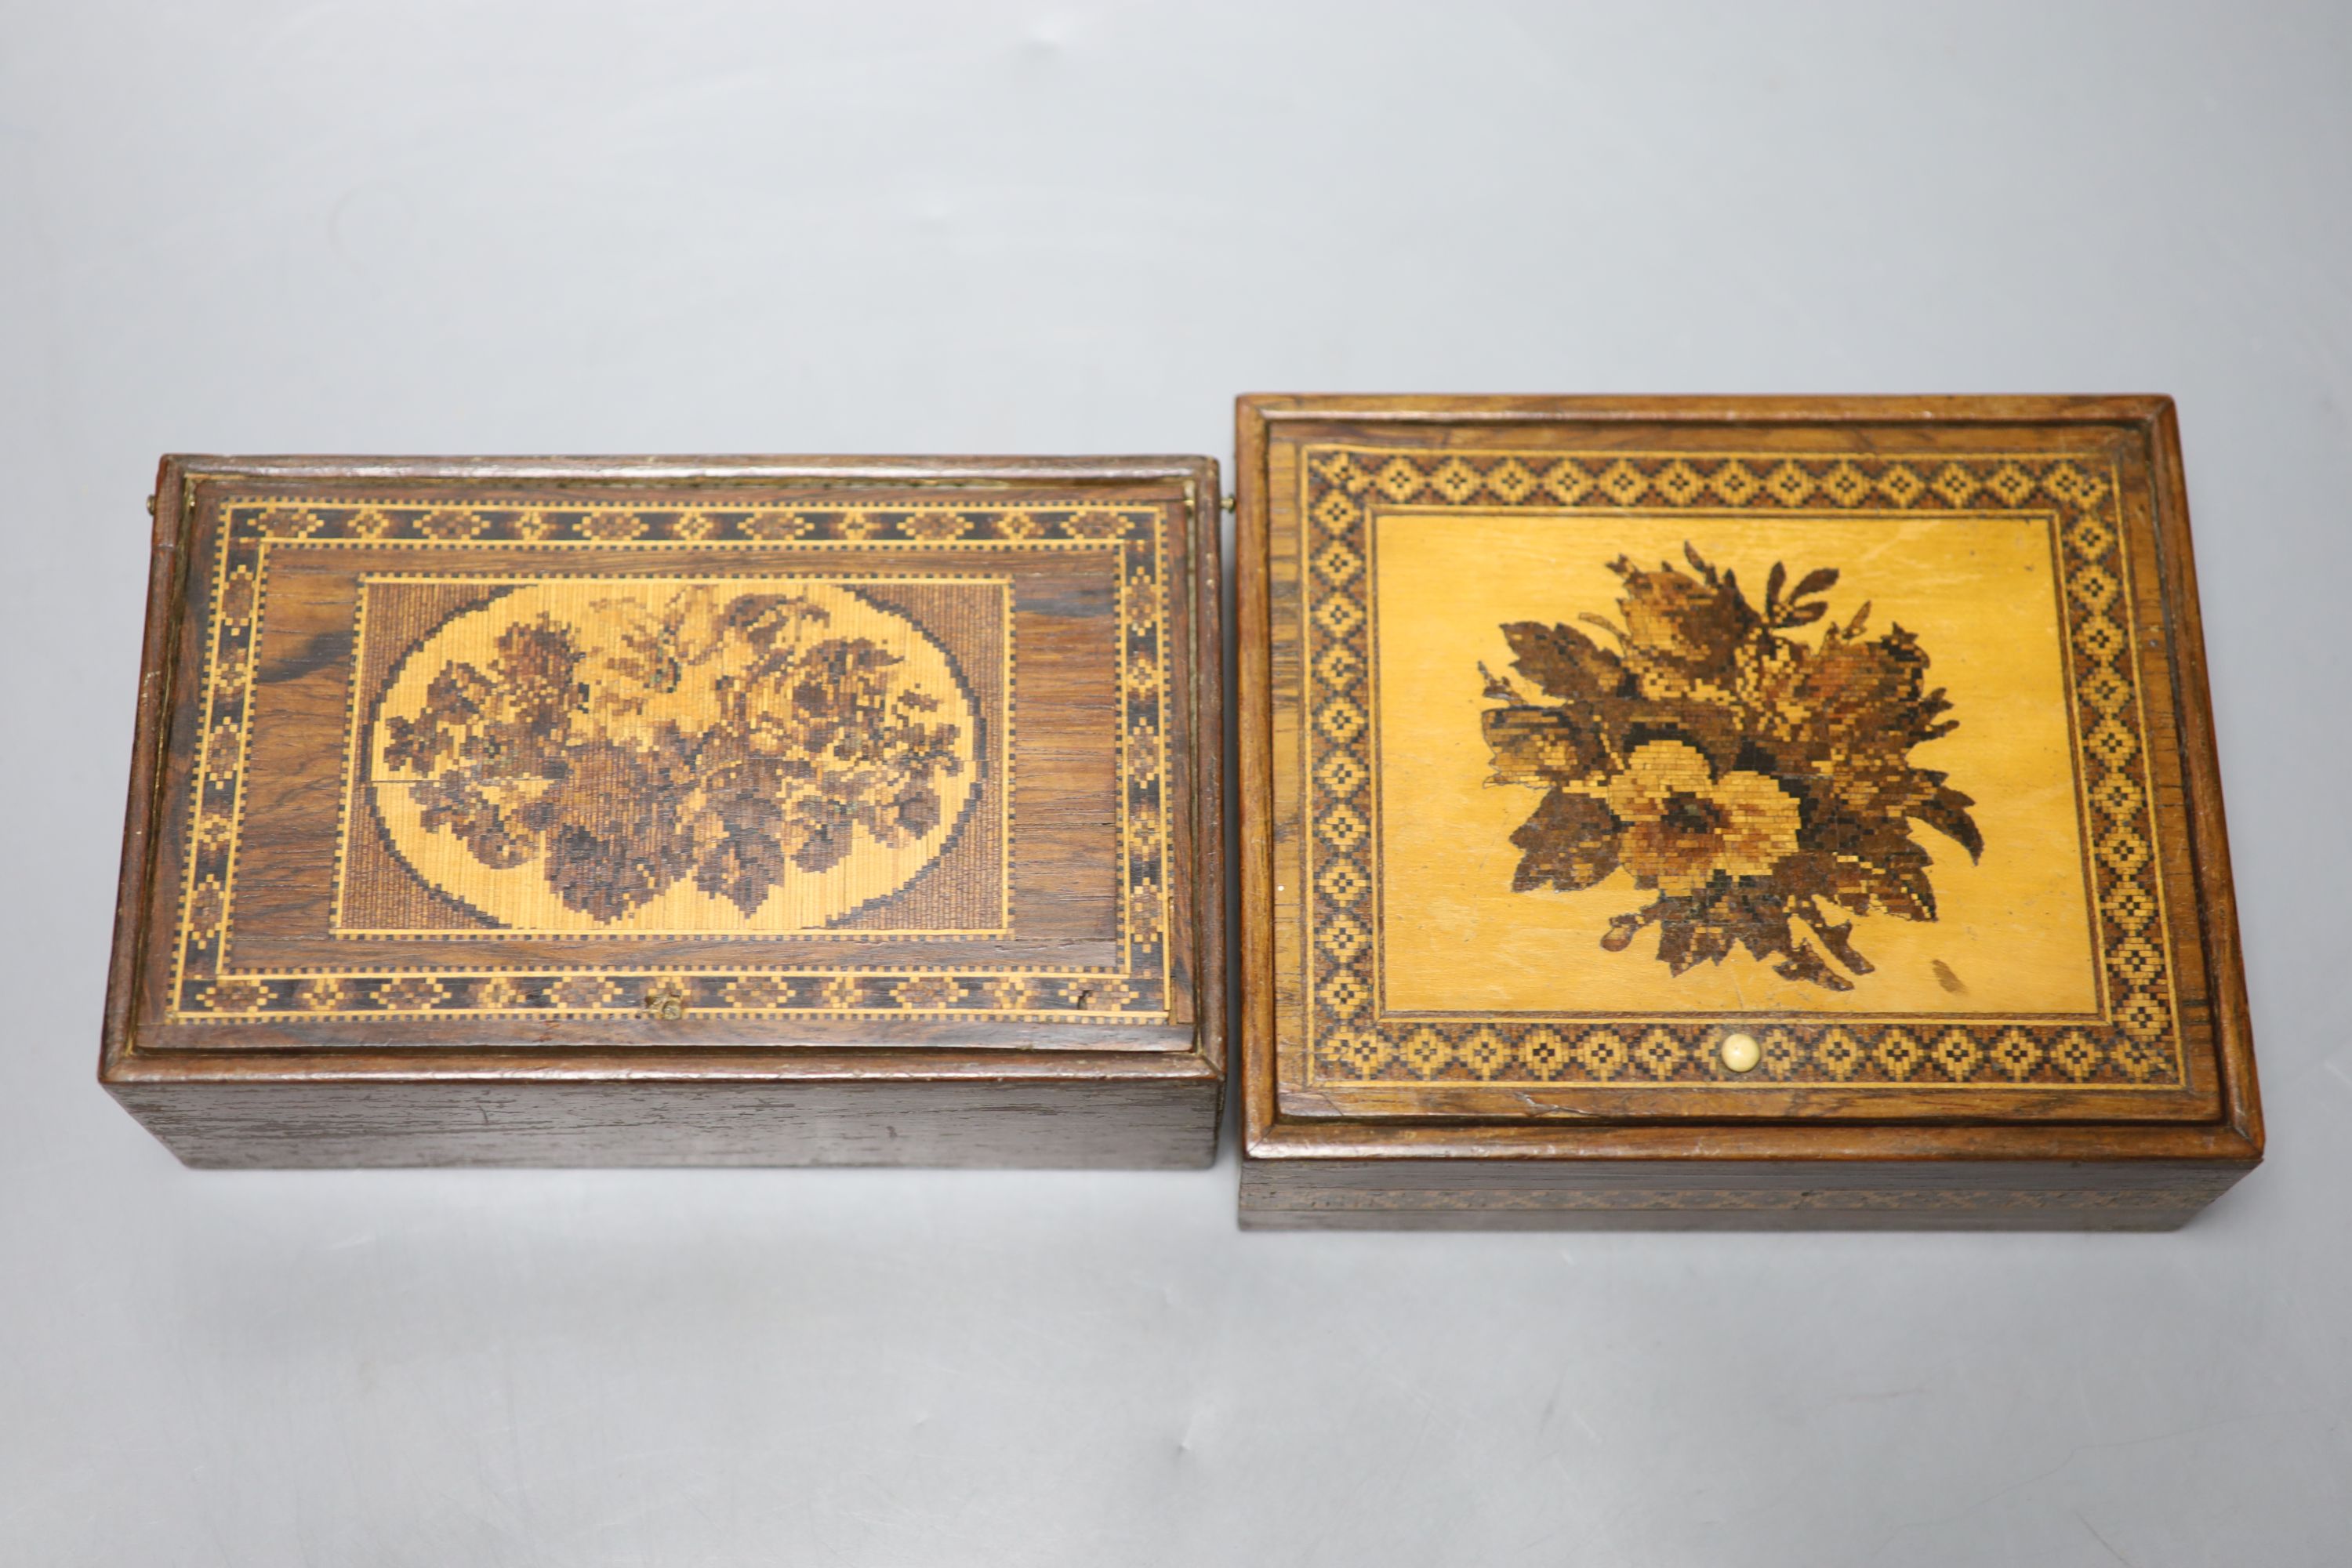 Two Tunbridge ware floral tesserae mosaic pin hinged boxes, late 19th century, 15.3 and 17cm